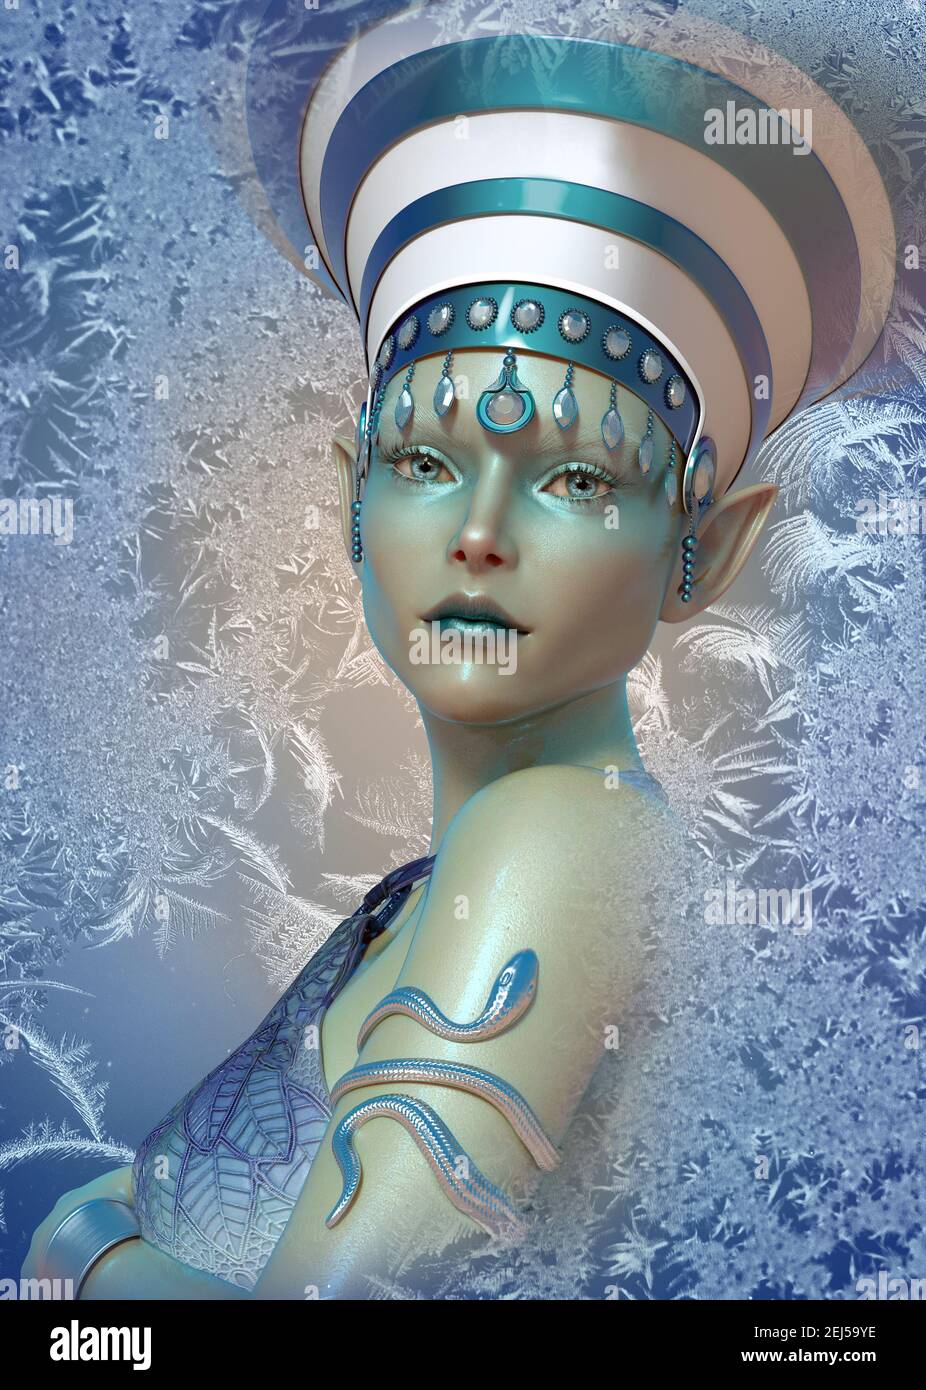 3d computer graphics of lady with headdress with a wintry background Stock Photo